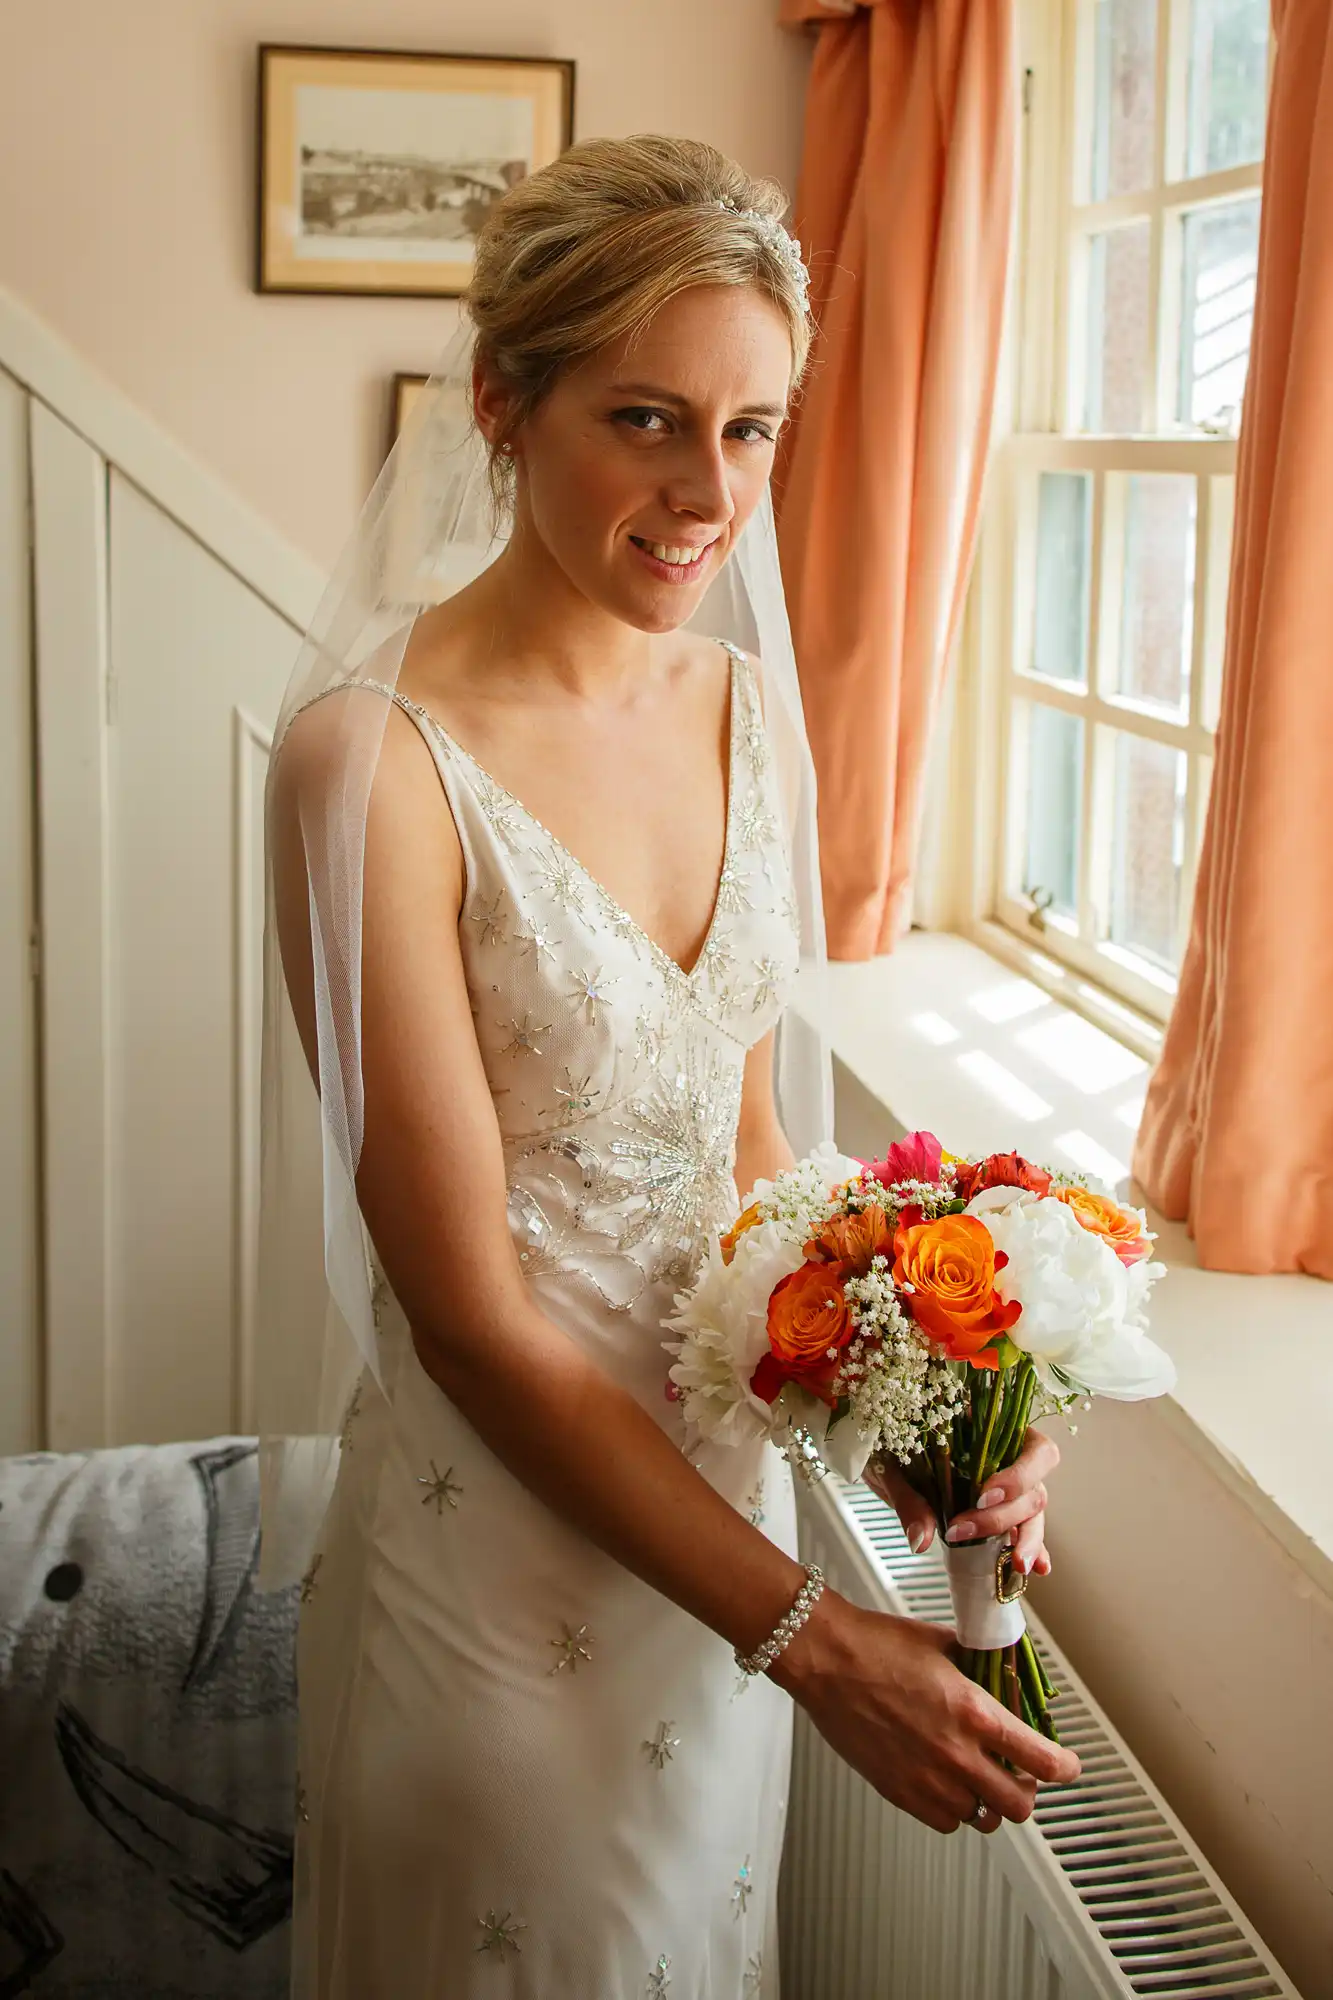 A bride in an embroidered wedding dress and veil holding a bouquet of orange and white flowers by a window with sheer curtains.